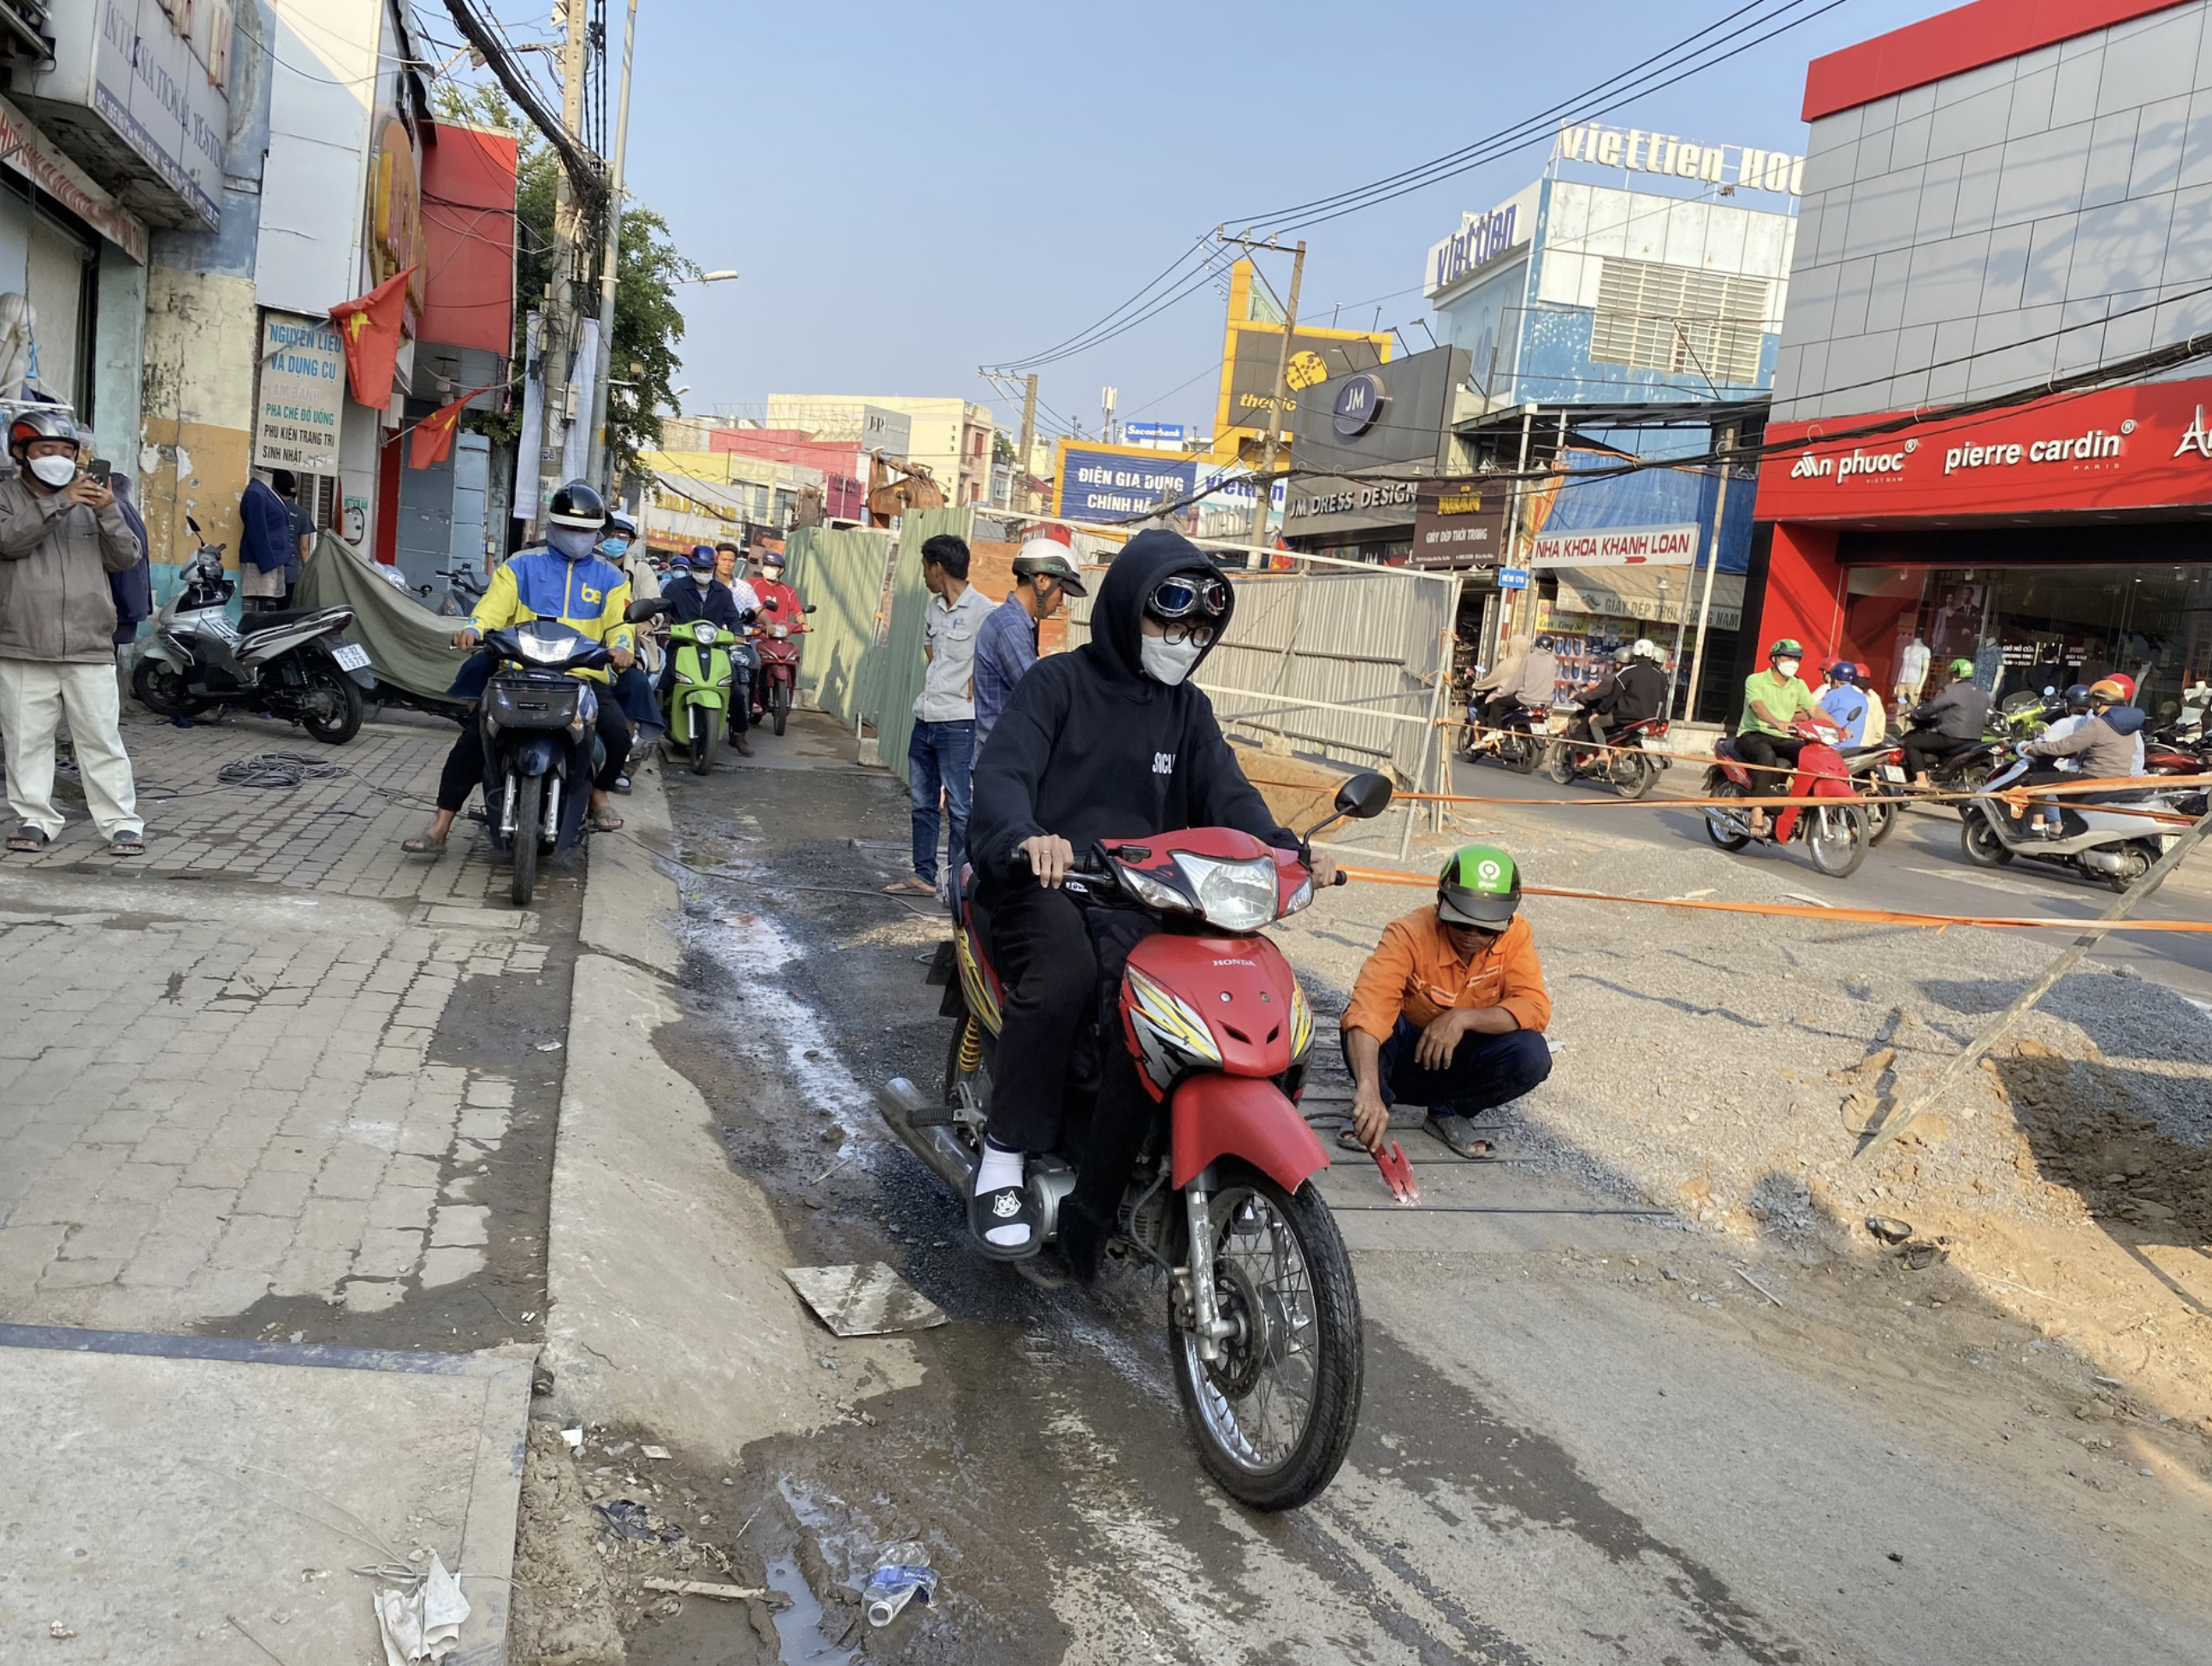 A worker is pictured welding steel bars on a slab on a section of Vo Van Ngan Street in Thu Duc City, Ho Chi Minh City. Photo: Tien Quoc / Tuoi Tre